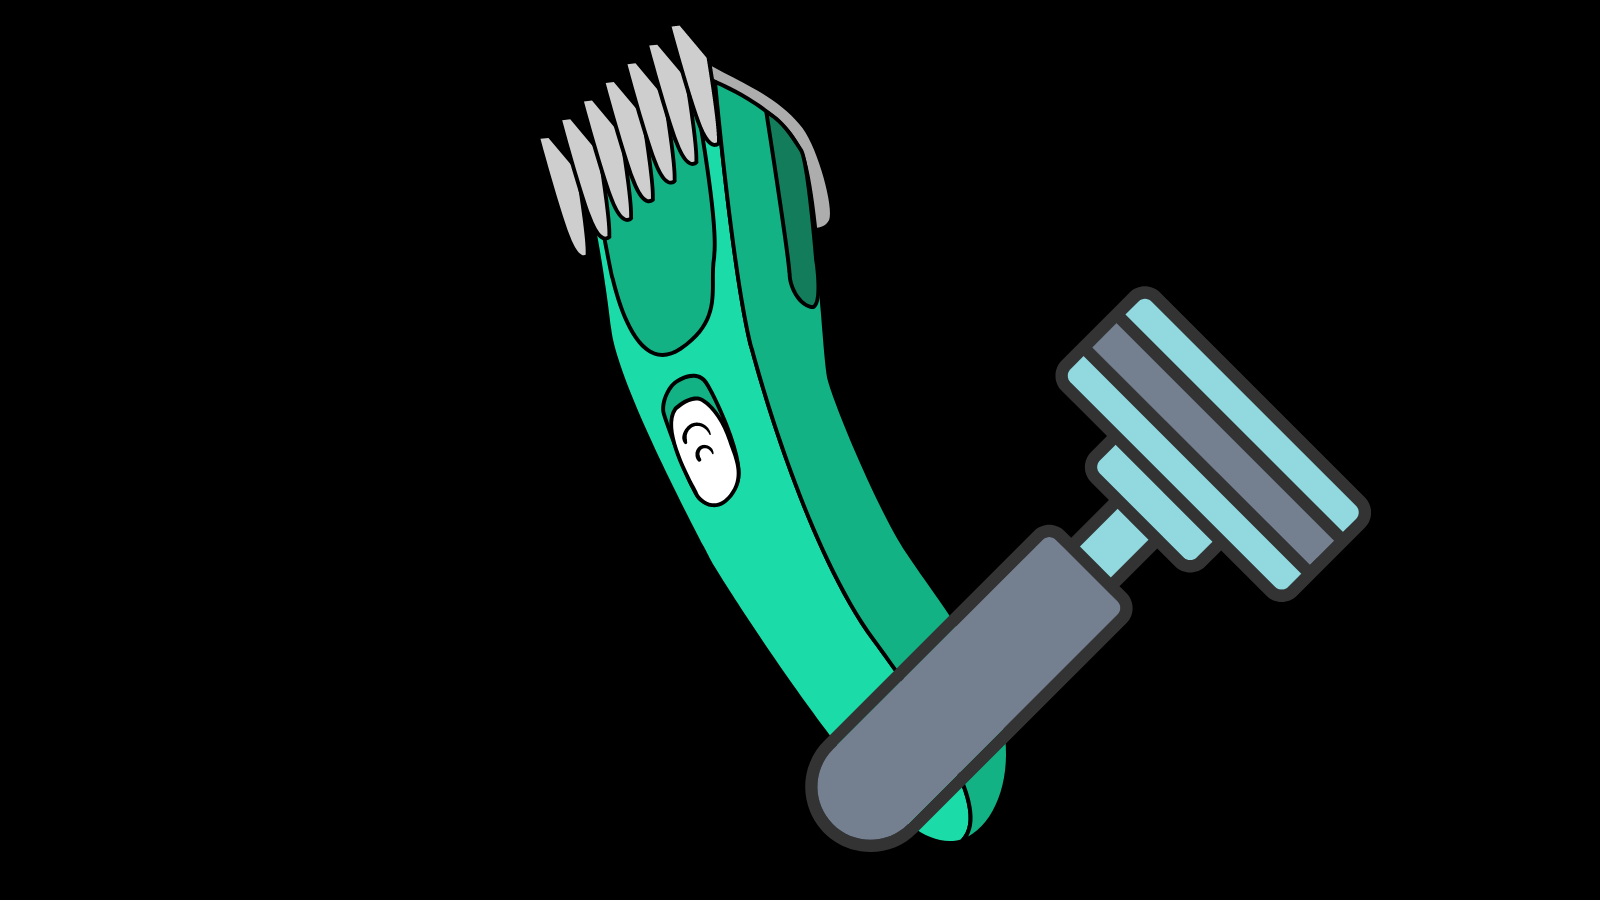 A set of hair clippers and a shaving razor